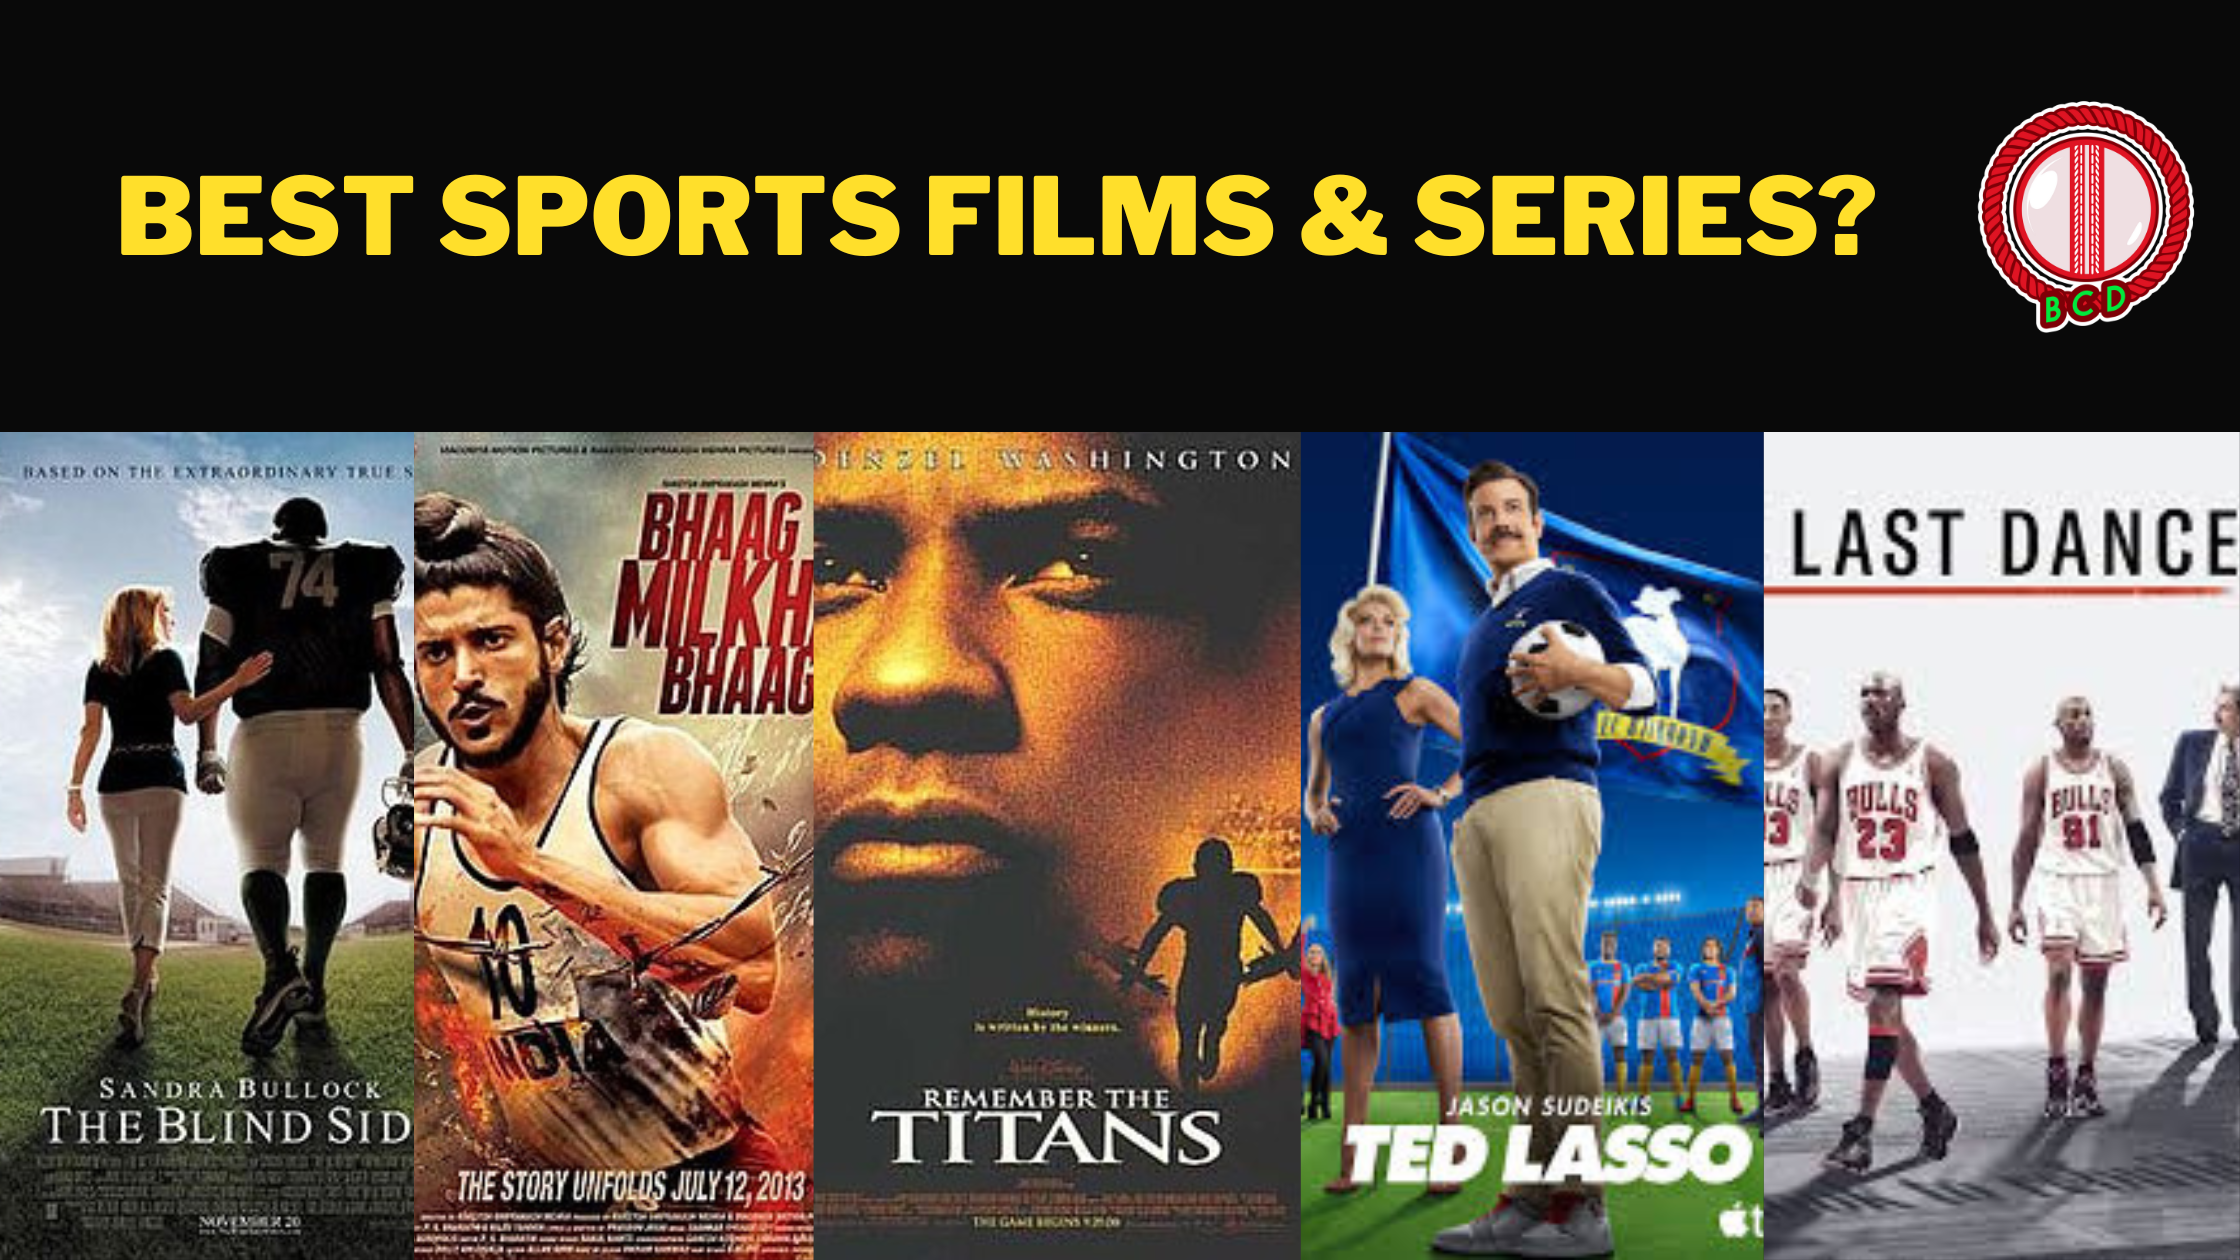 59 Best Sport Movies, TV Shows, & Documentaries (Updated 2022) – Hollywood & Bollywood Combined